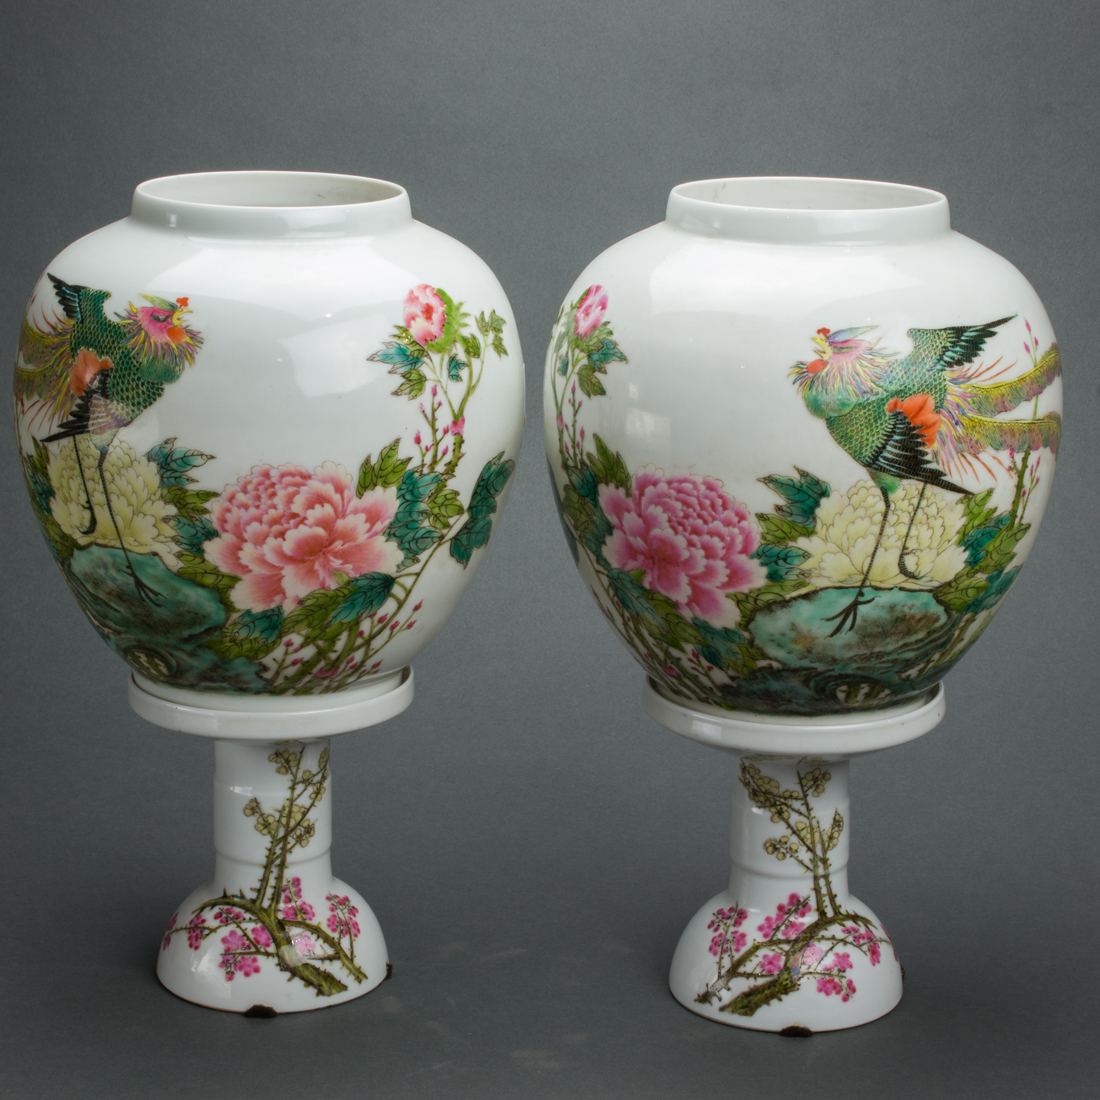 PAIR OF CHINESE FAMILLE ROSE EGG-SHELL